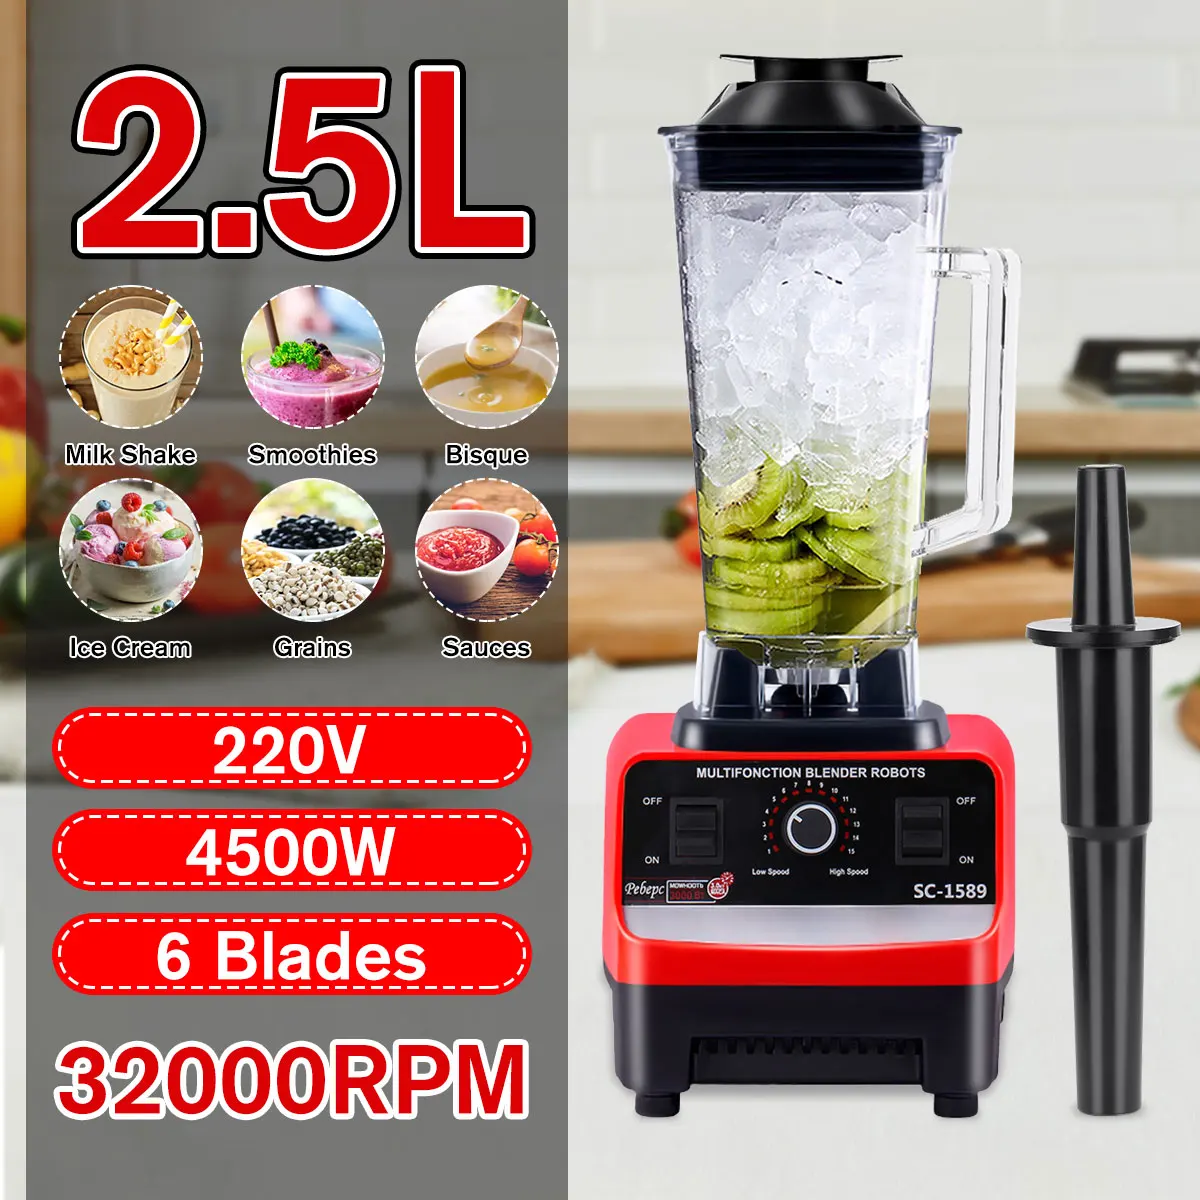 

2.5L 4500W Blender Professional Heavy Duty Commercial Mixer Juicer 32000RPM Speed Grinder Ice Smoothies Coffee Maker BPA Free